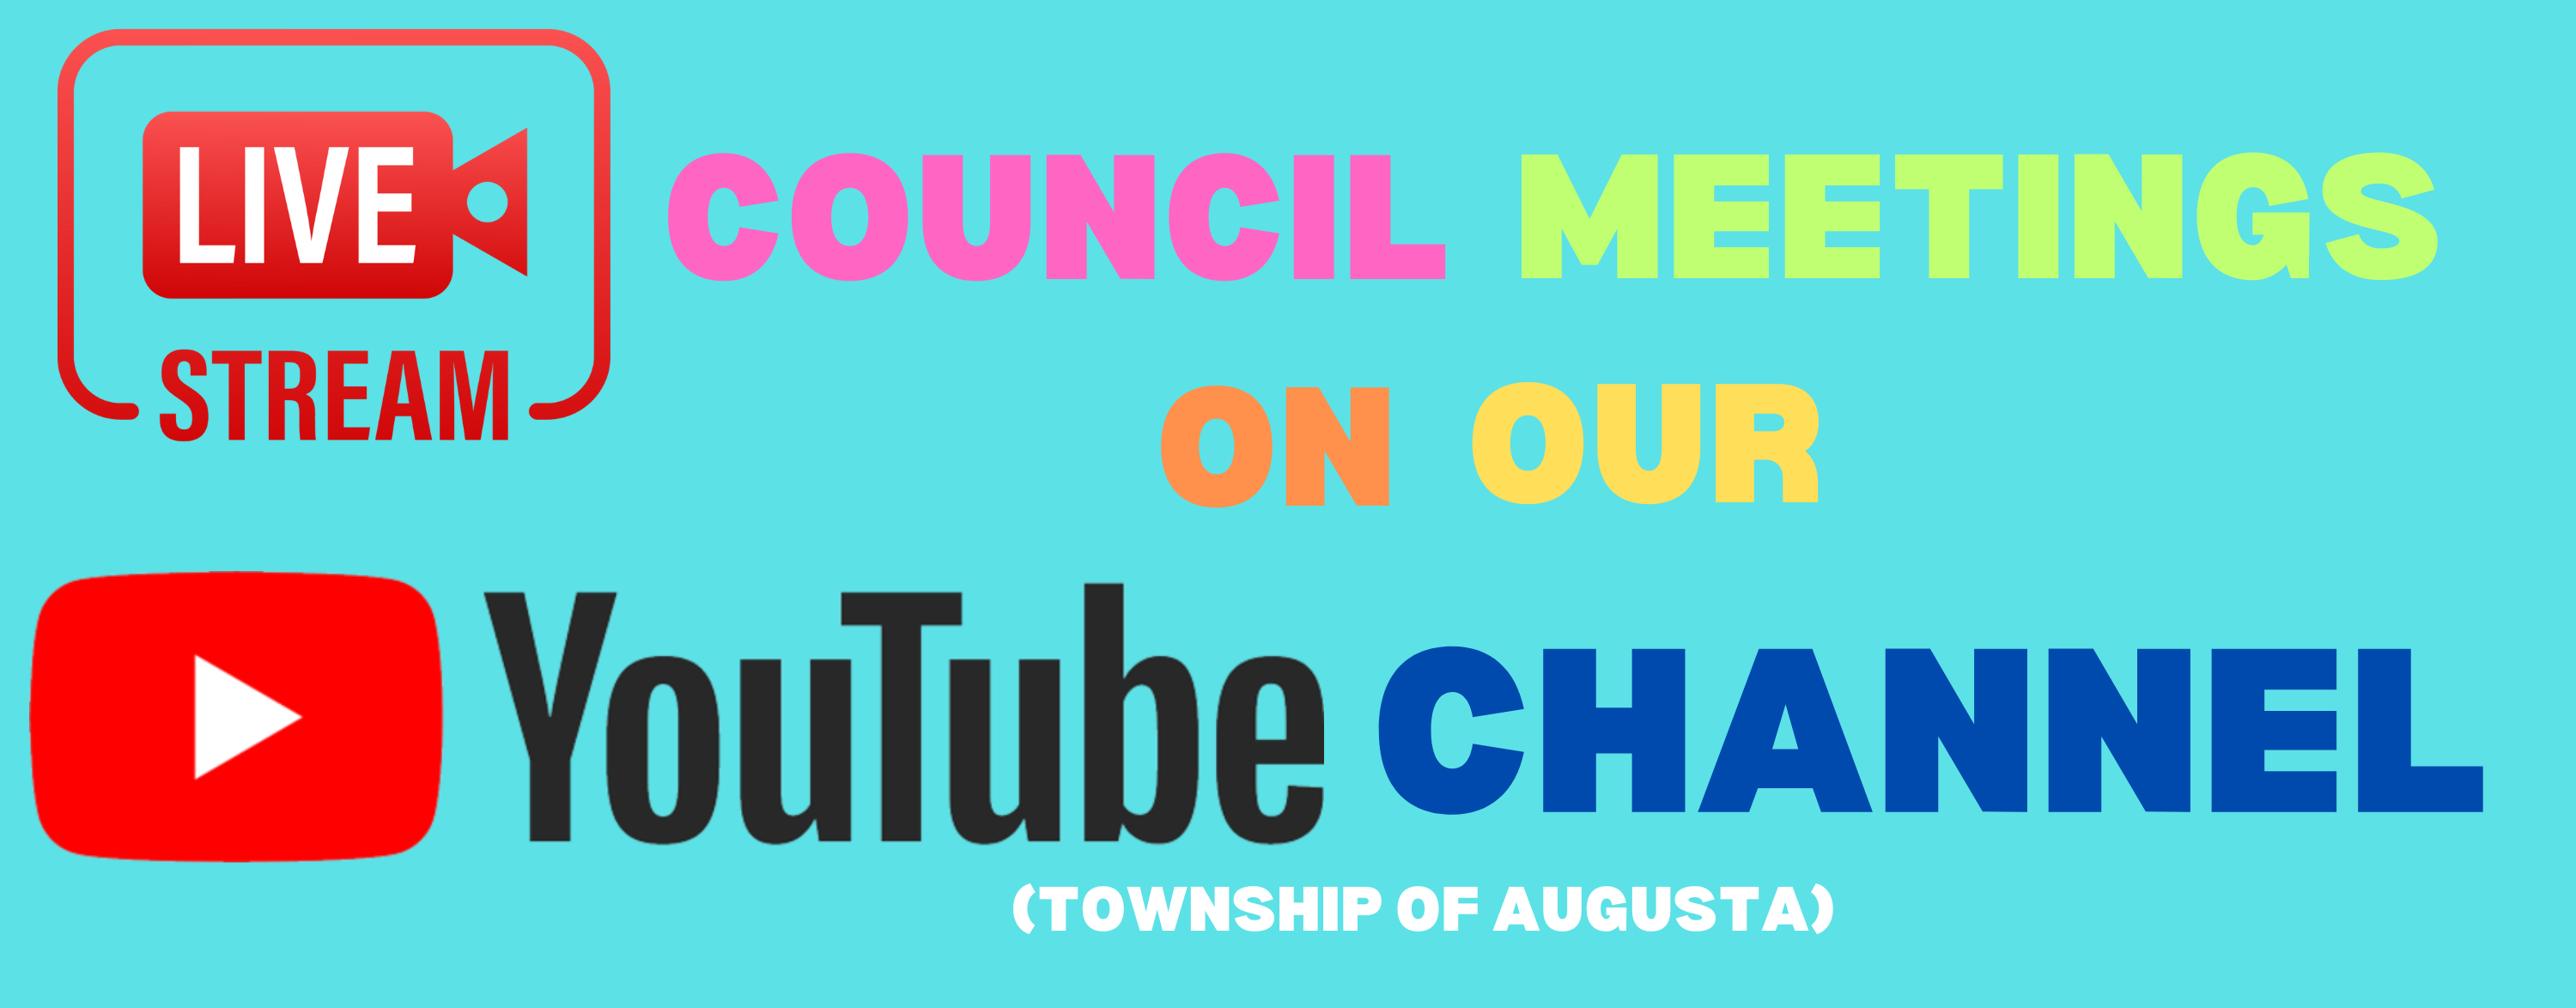 live stream council meetings on our youtube channel